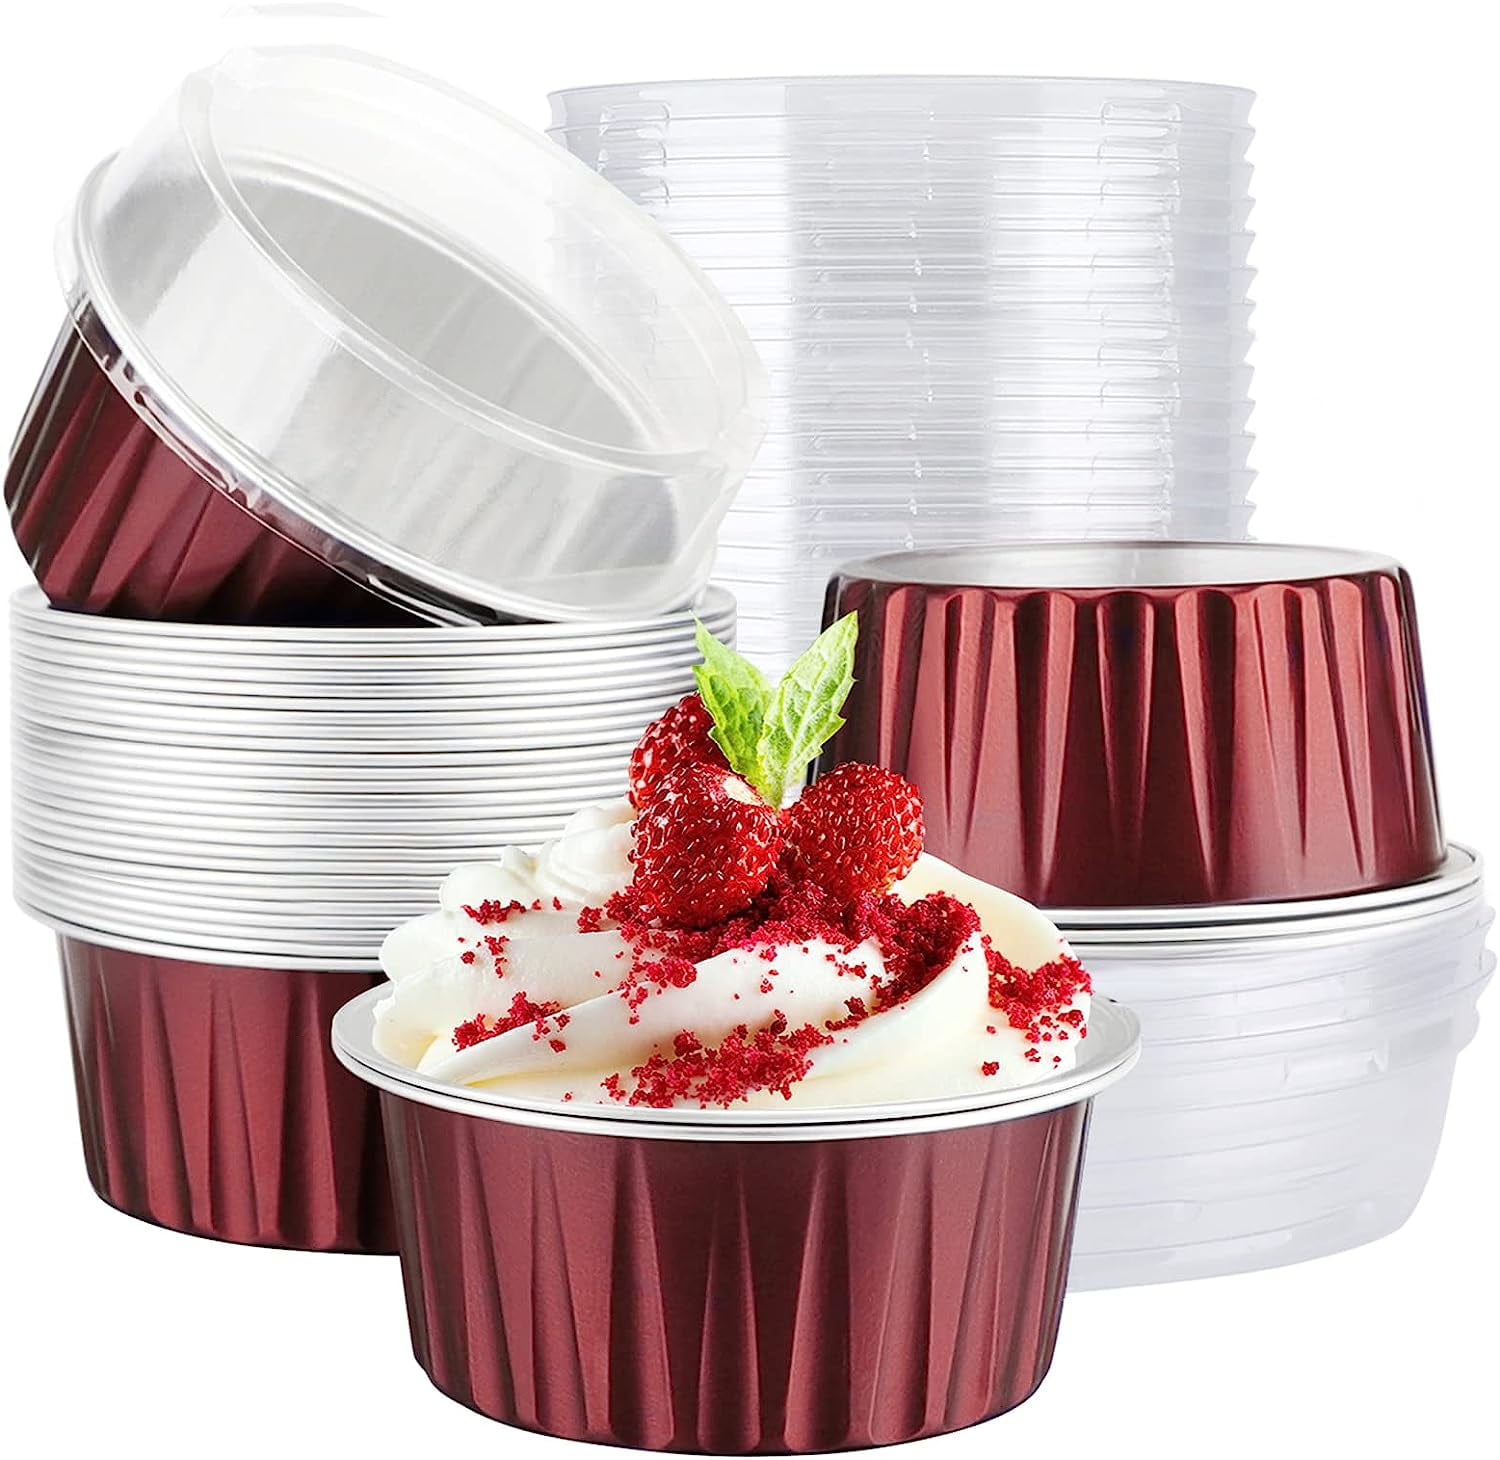 Restaurantware 10 Ounce Disposable Ramekins, 100 Square Creme Brulee Disposable Cups - Oven-Safe, for Cupcakes and Muffins, Pink Aluminum Disposable